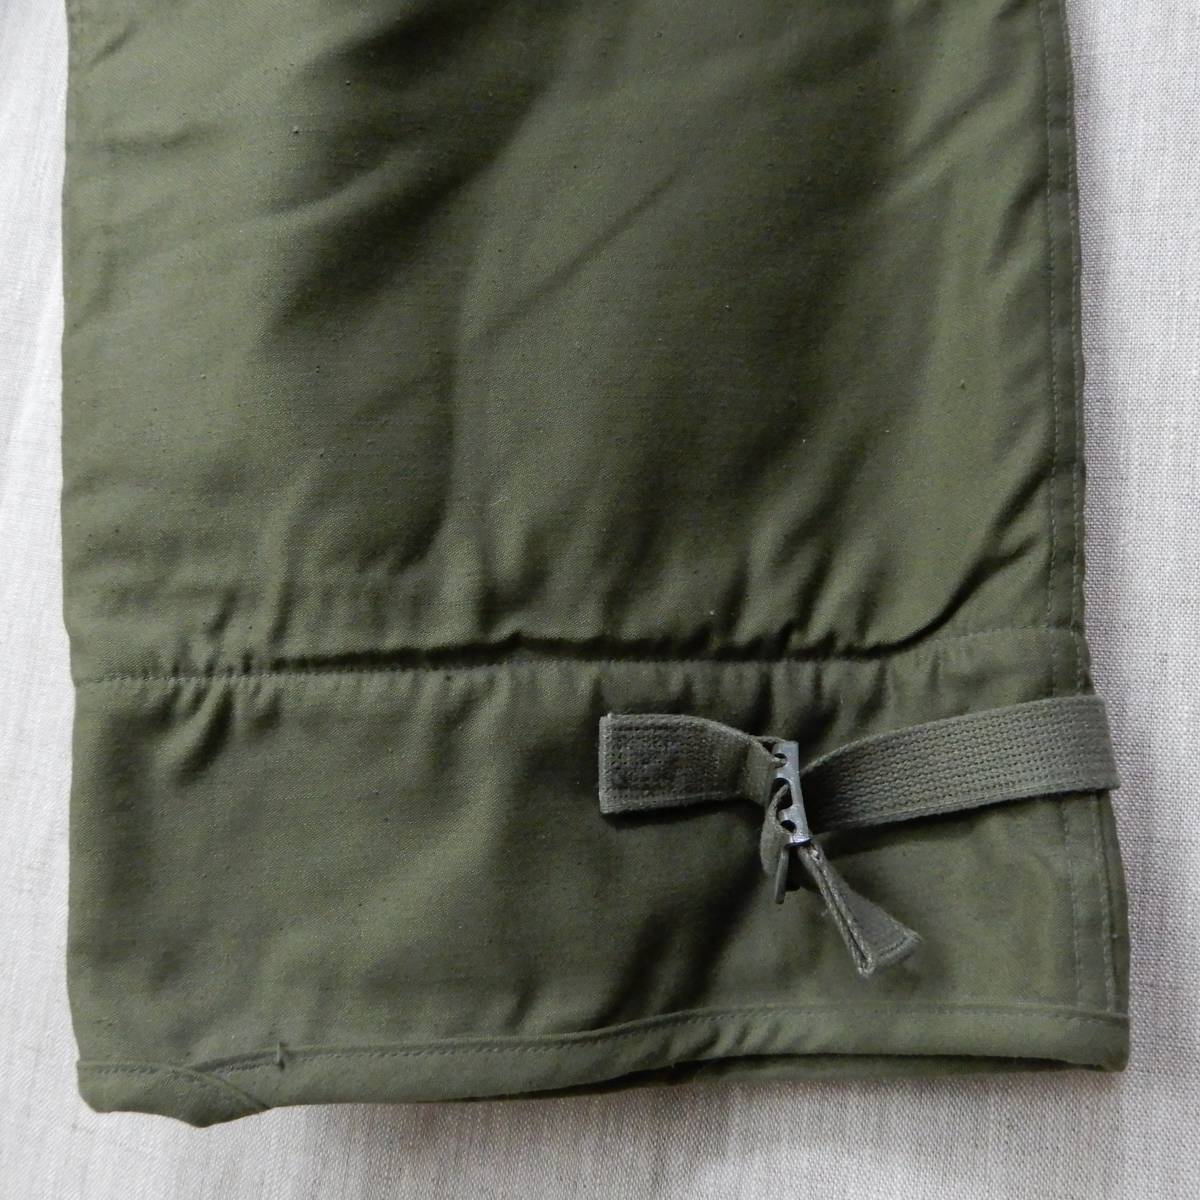 US NAVY A-2 DECK TROUSERS 1978s Deadstock SMALL-6 Vintage アメリカ海軍 デッキパンツ 1978年製 デッドストック ヴィンテージ_画像4